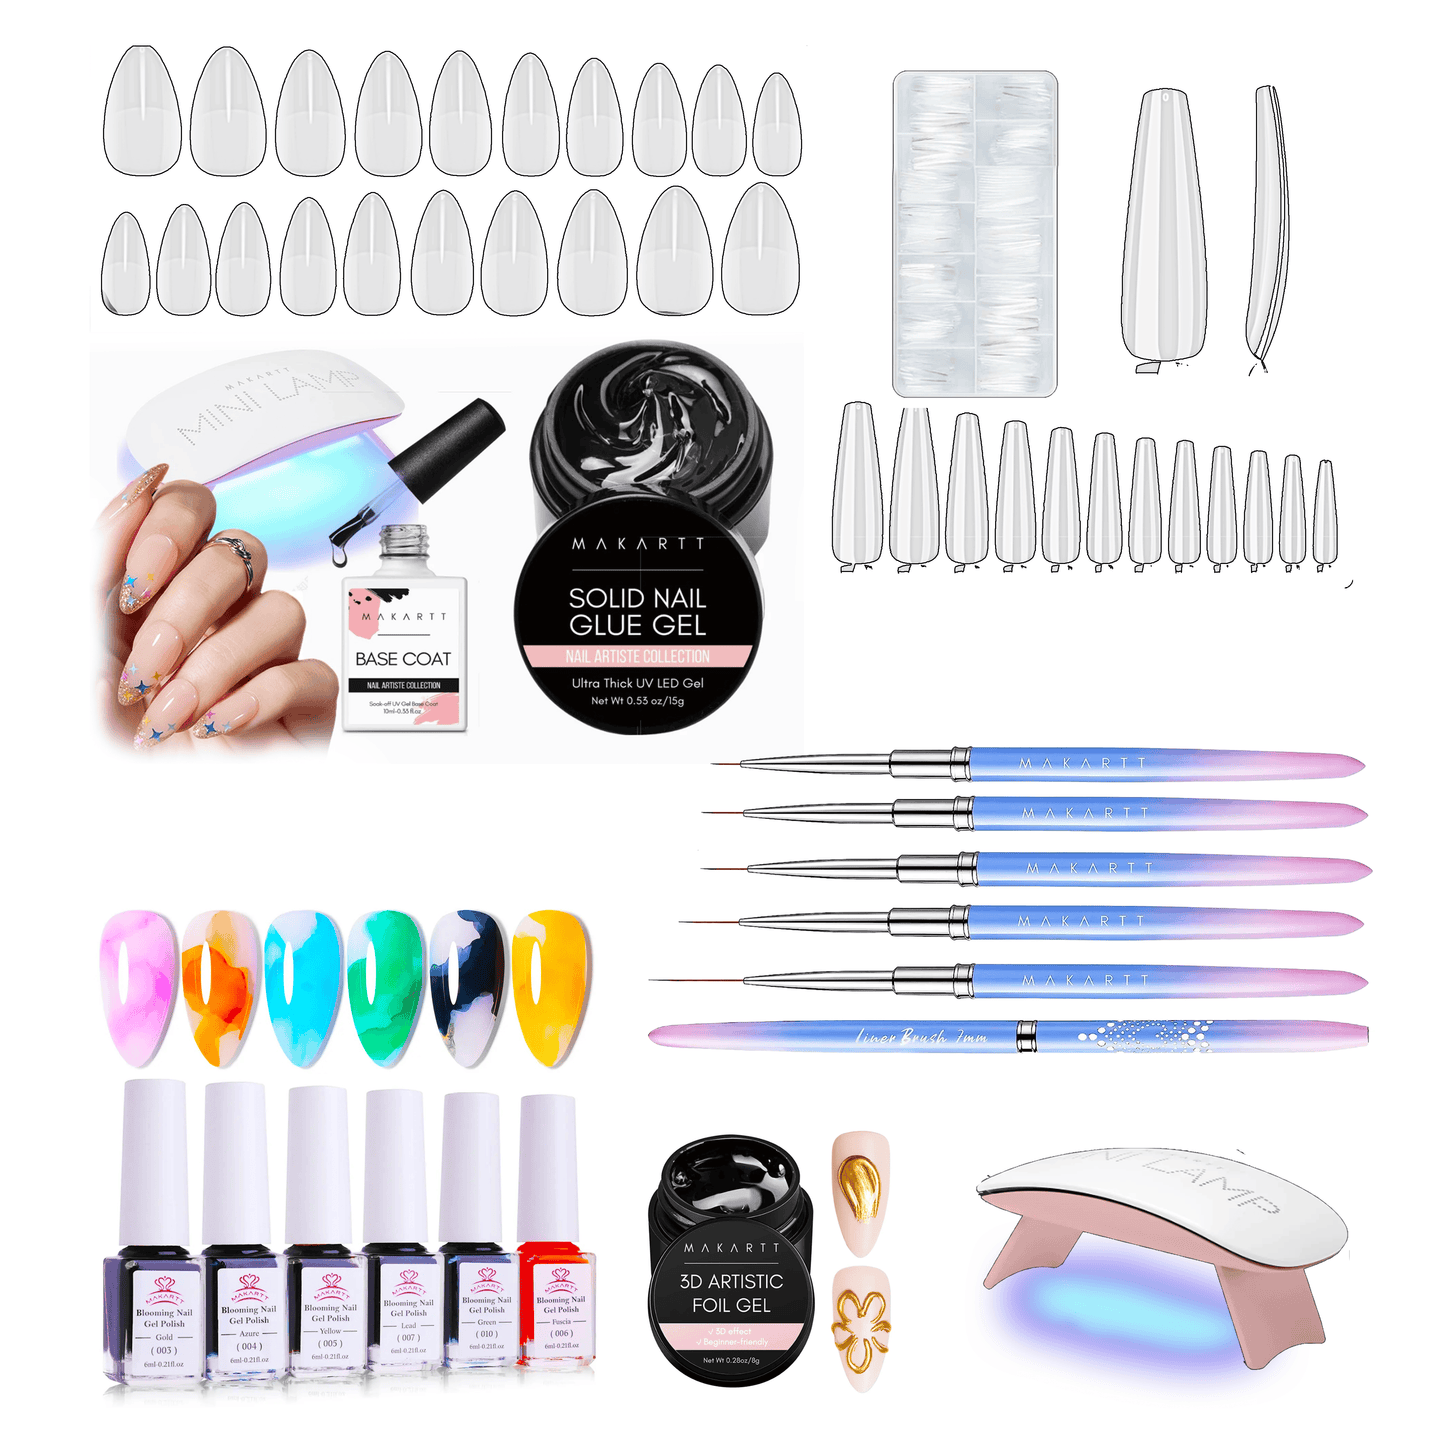 APHRODITES LITERALLY ALL IN ONE NAIL KIT